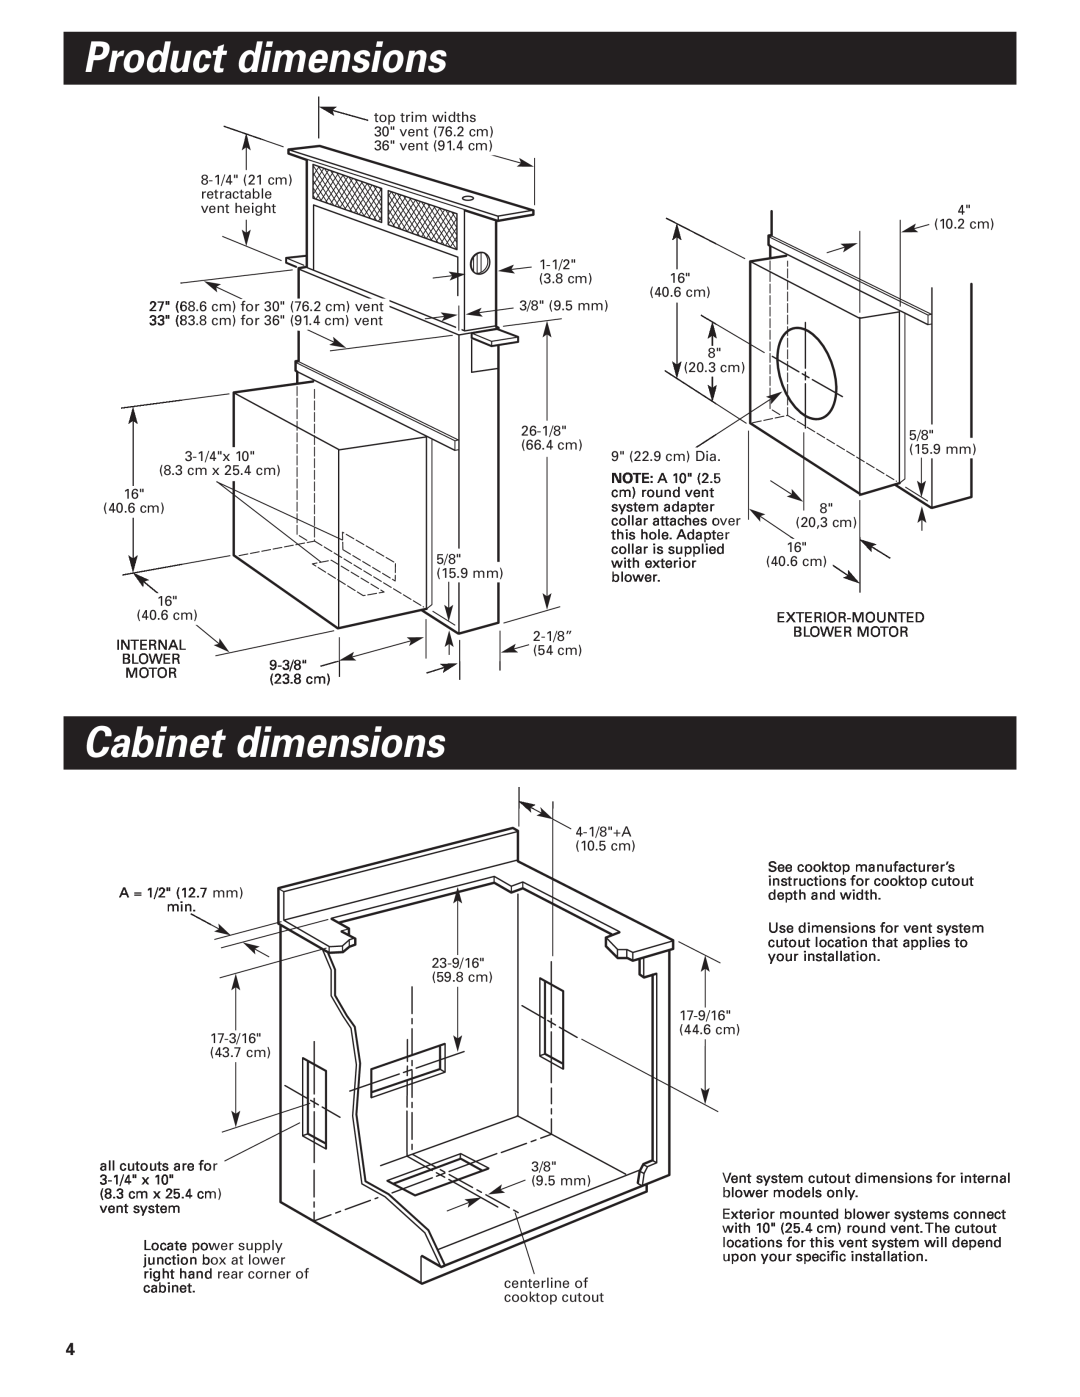 Whirlpool GZ7930XGS0 installation instructions Product dimensions, Cabinet dimensions 